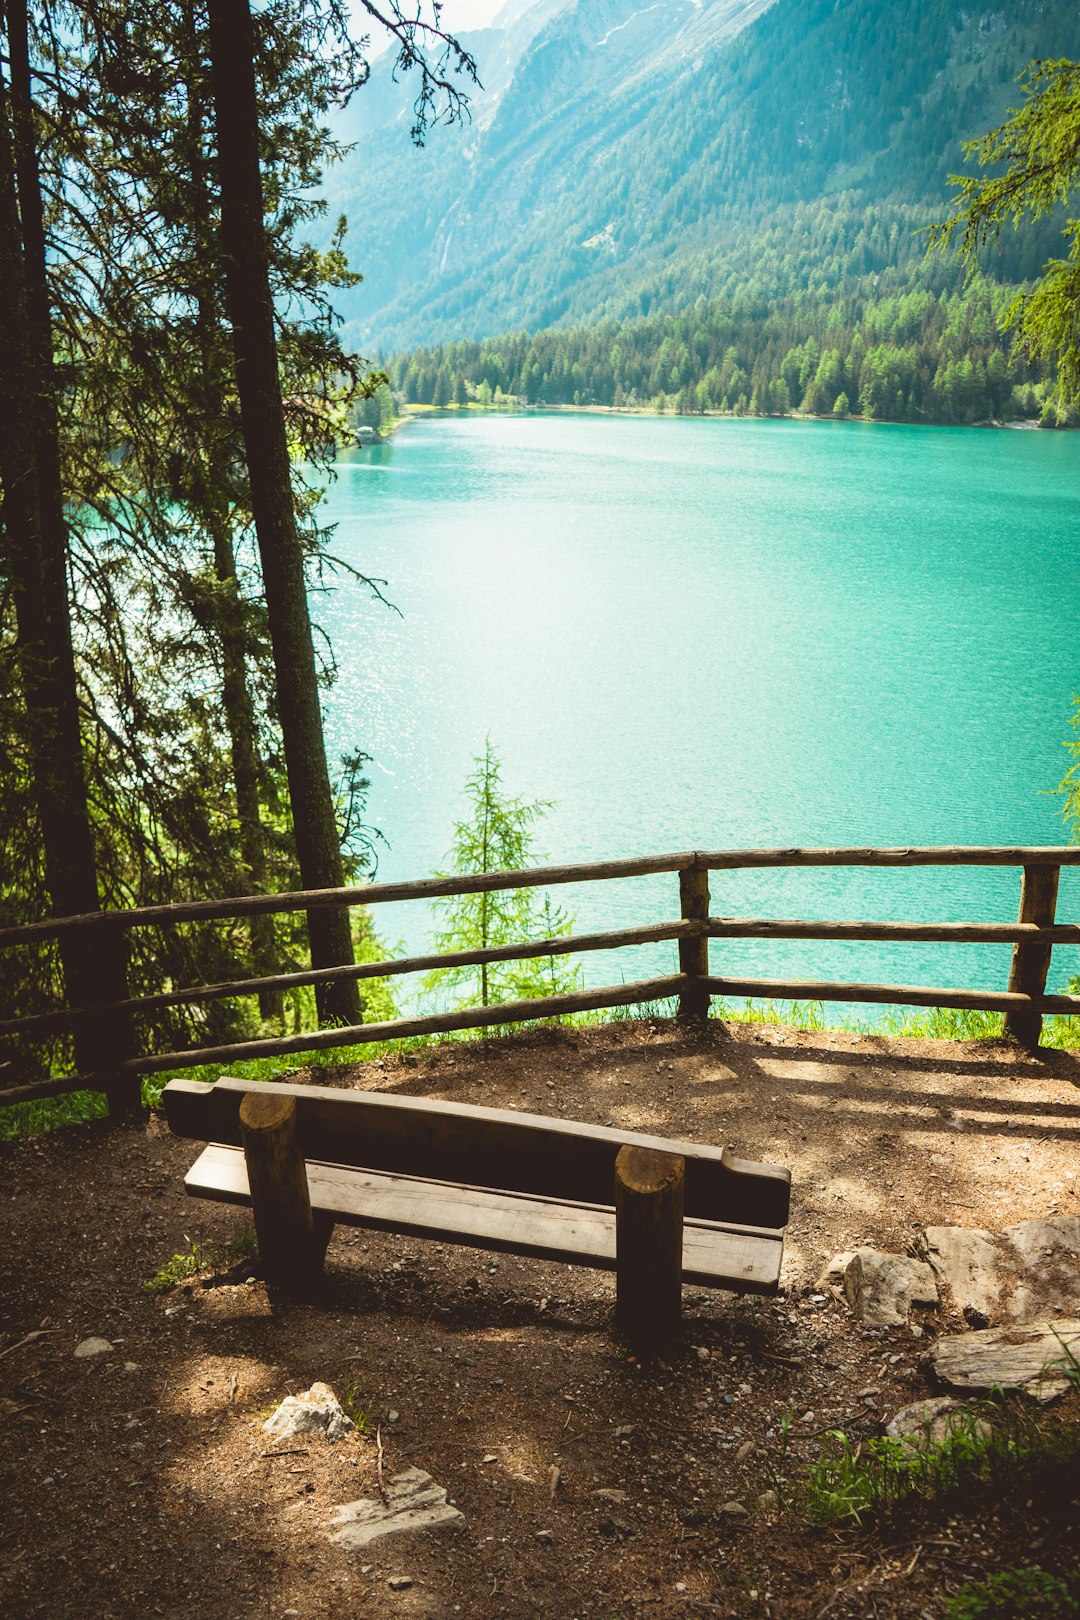 brown wooden bench near body of water during daytime